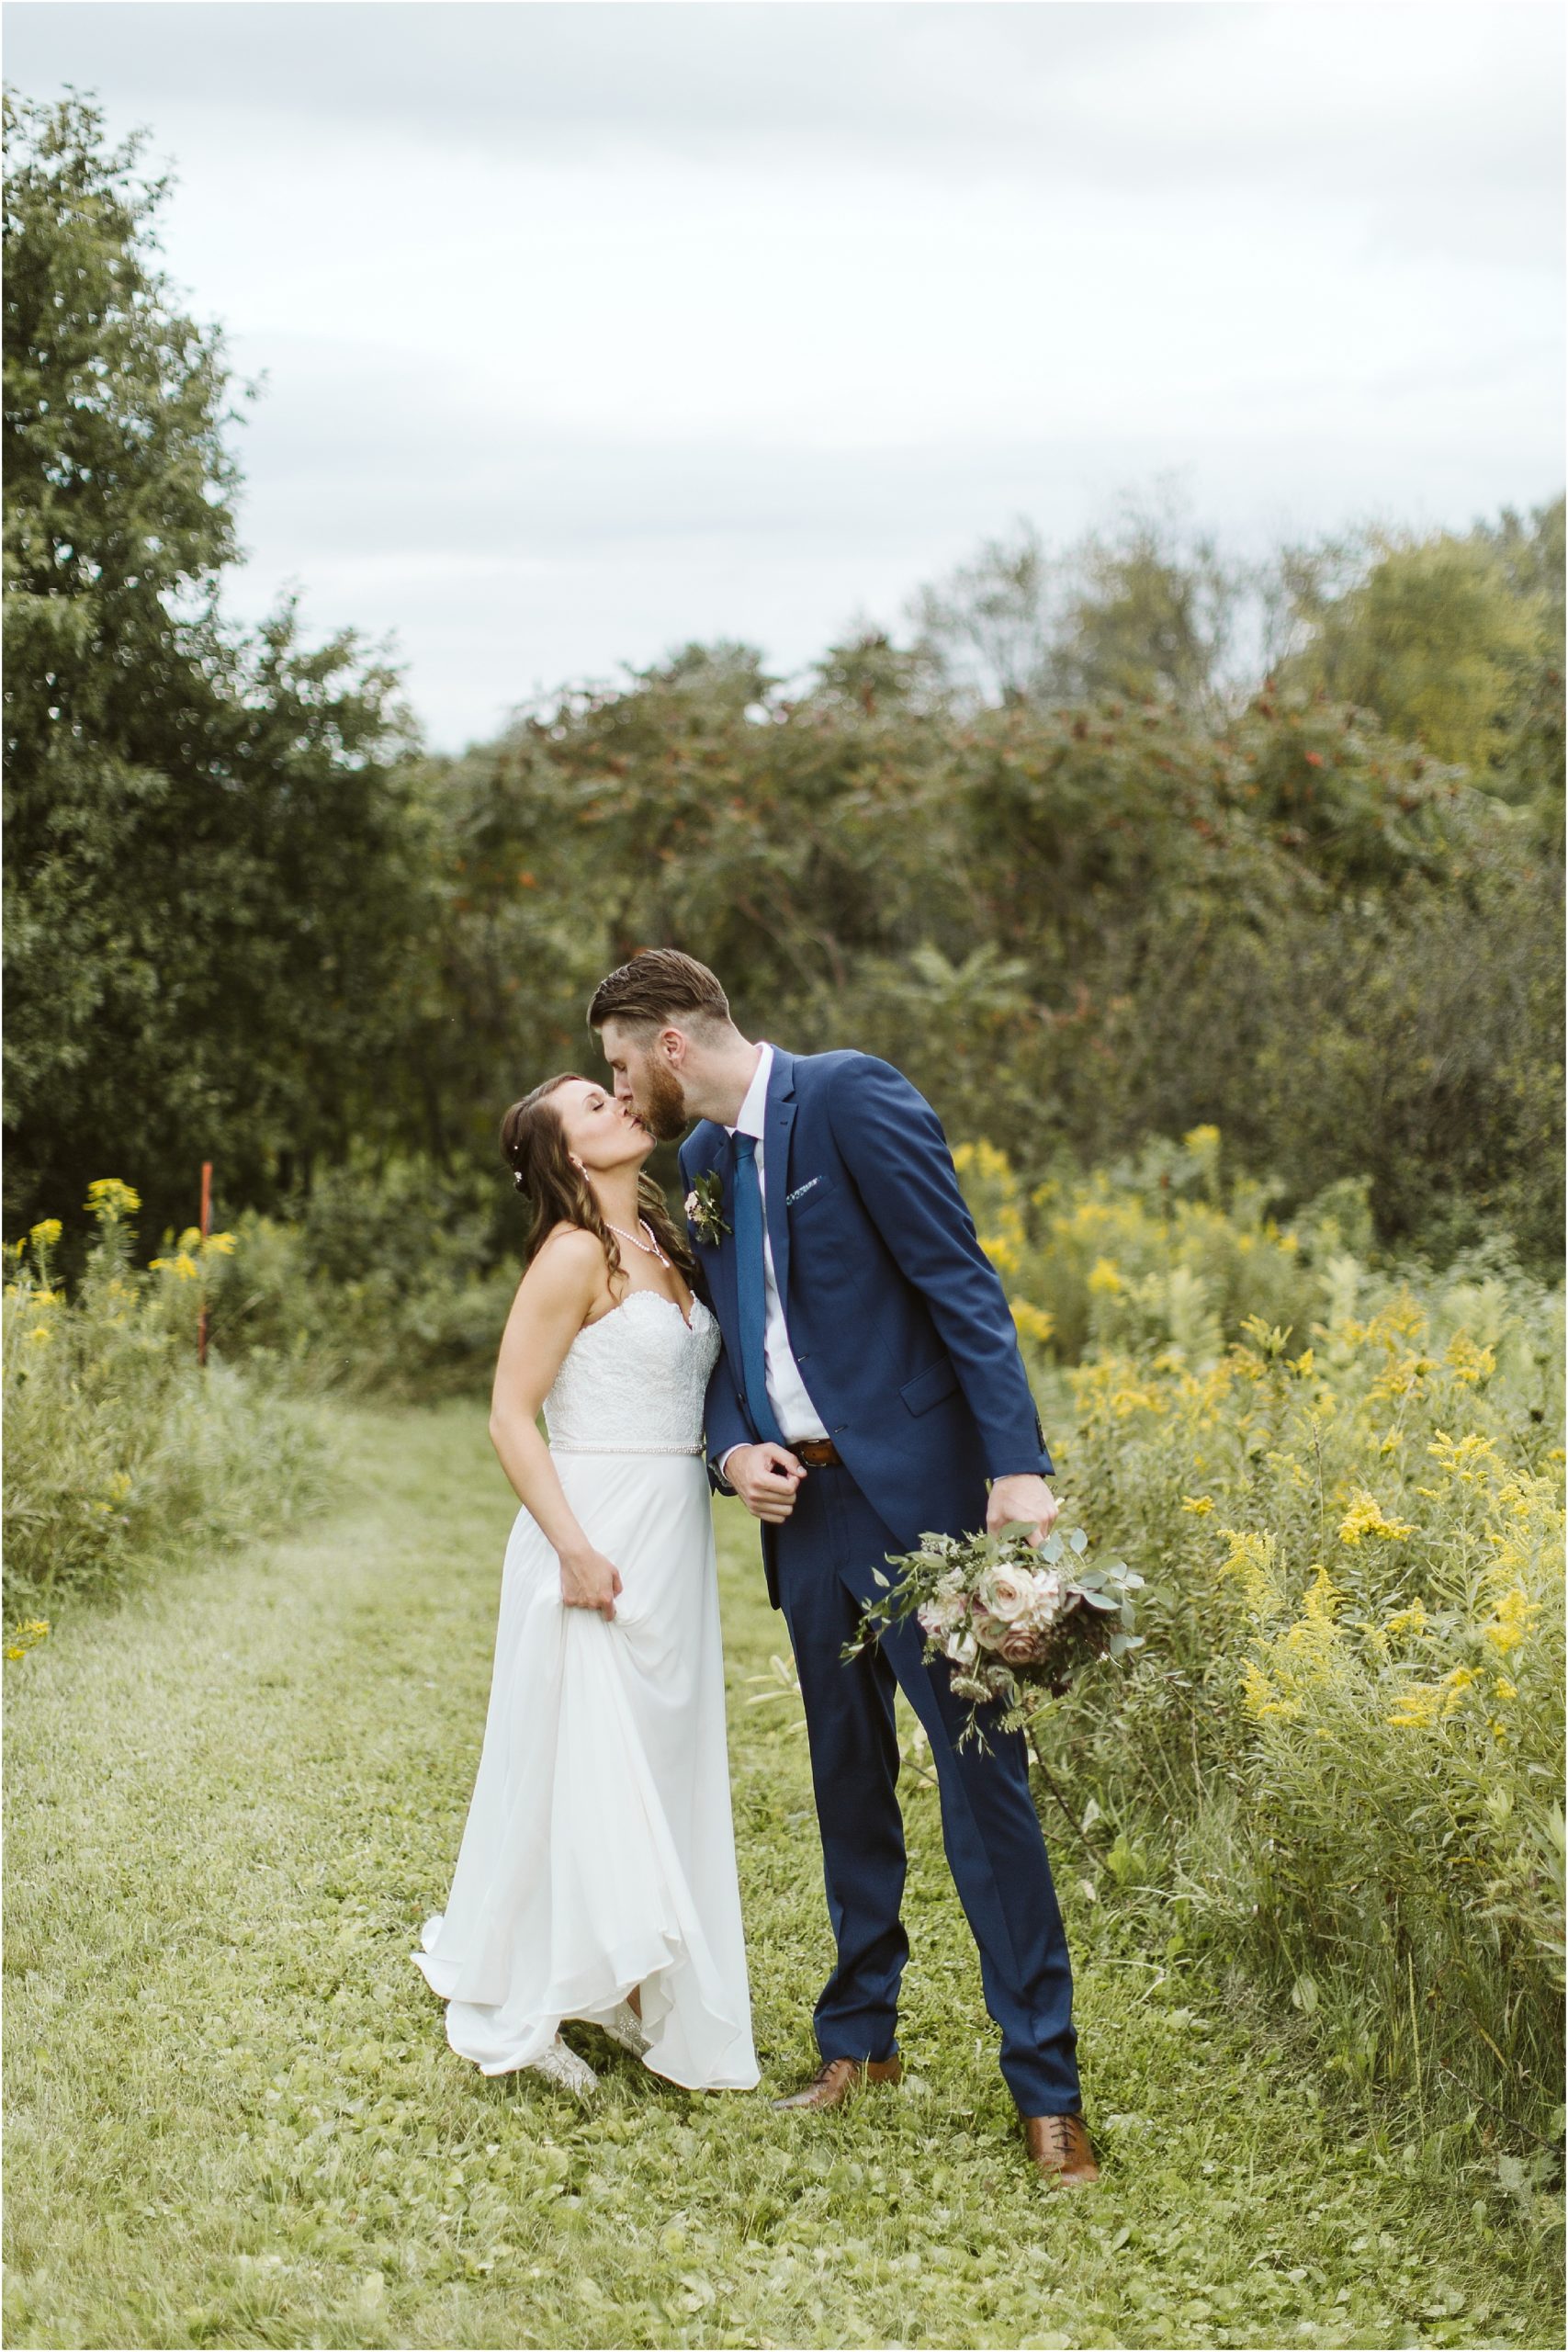 alysa rene photography, enchanted barn, the enchanted barn, hillsdale, wisconsin, eau claire, rainy, summer, midwest, wedding, photographer, photography, relaxed, rustic